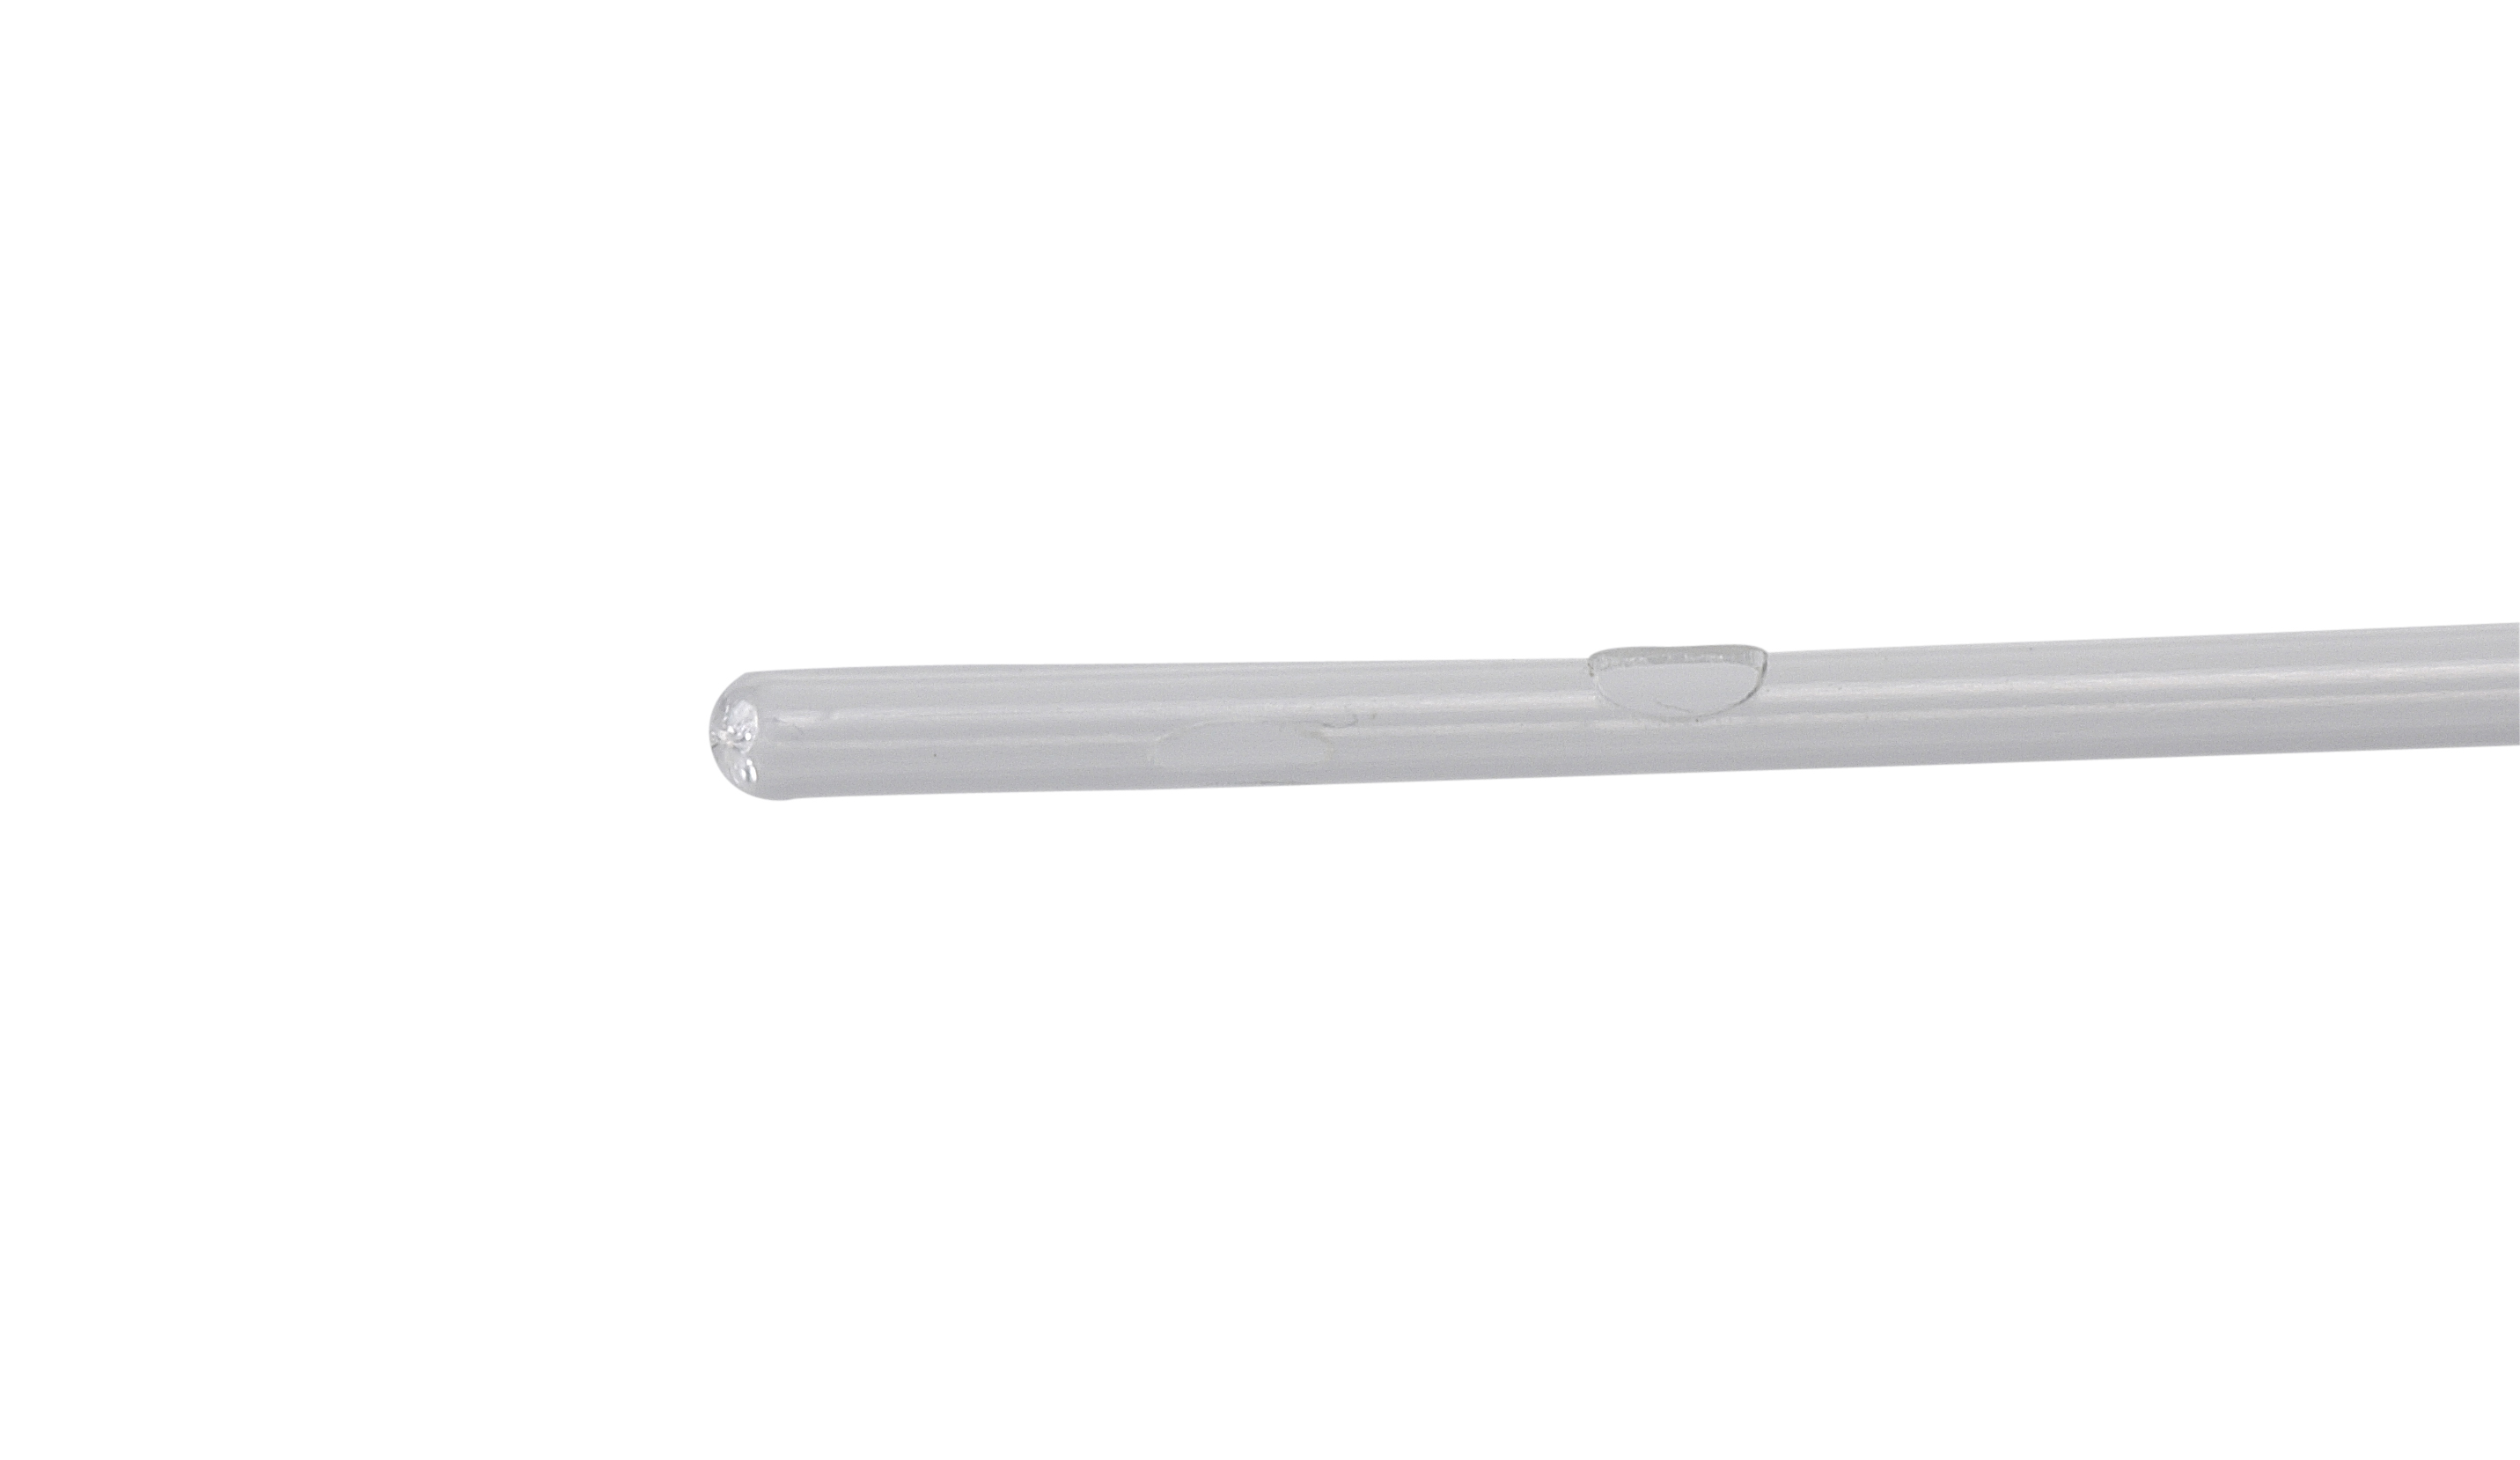 BUSTER cat catheter 1.3x160 mm, without stylet, sterile, 12/pk